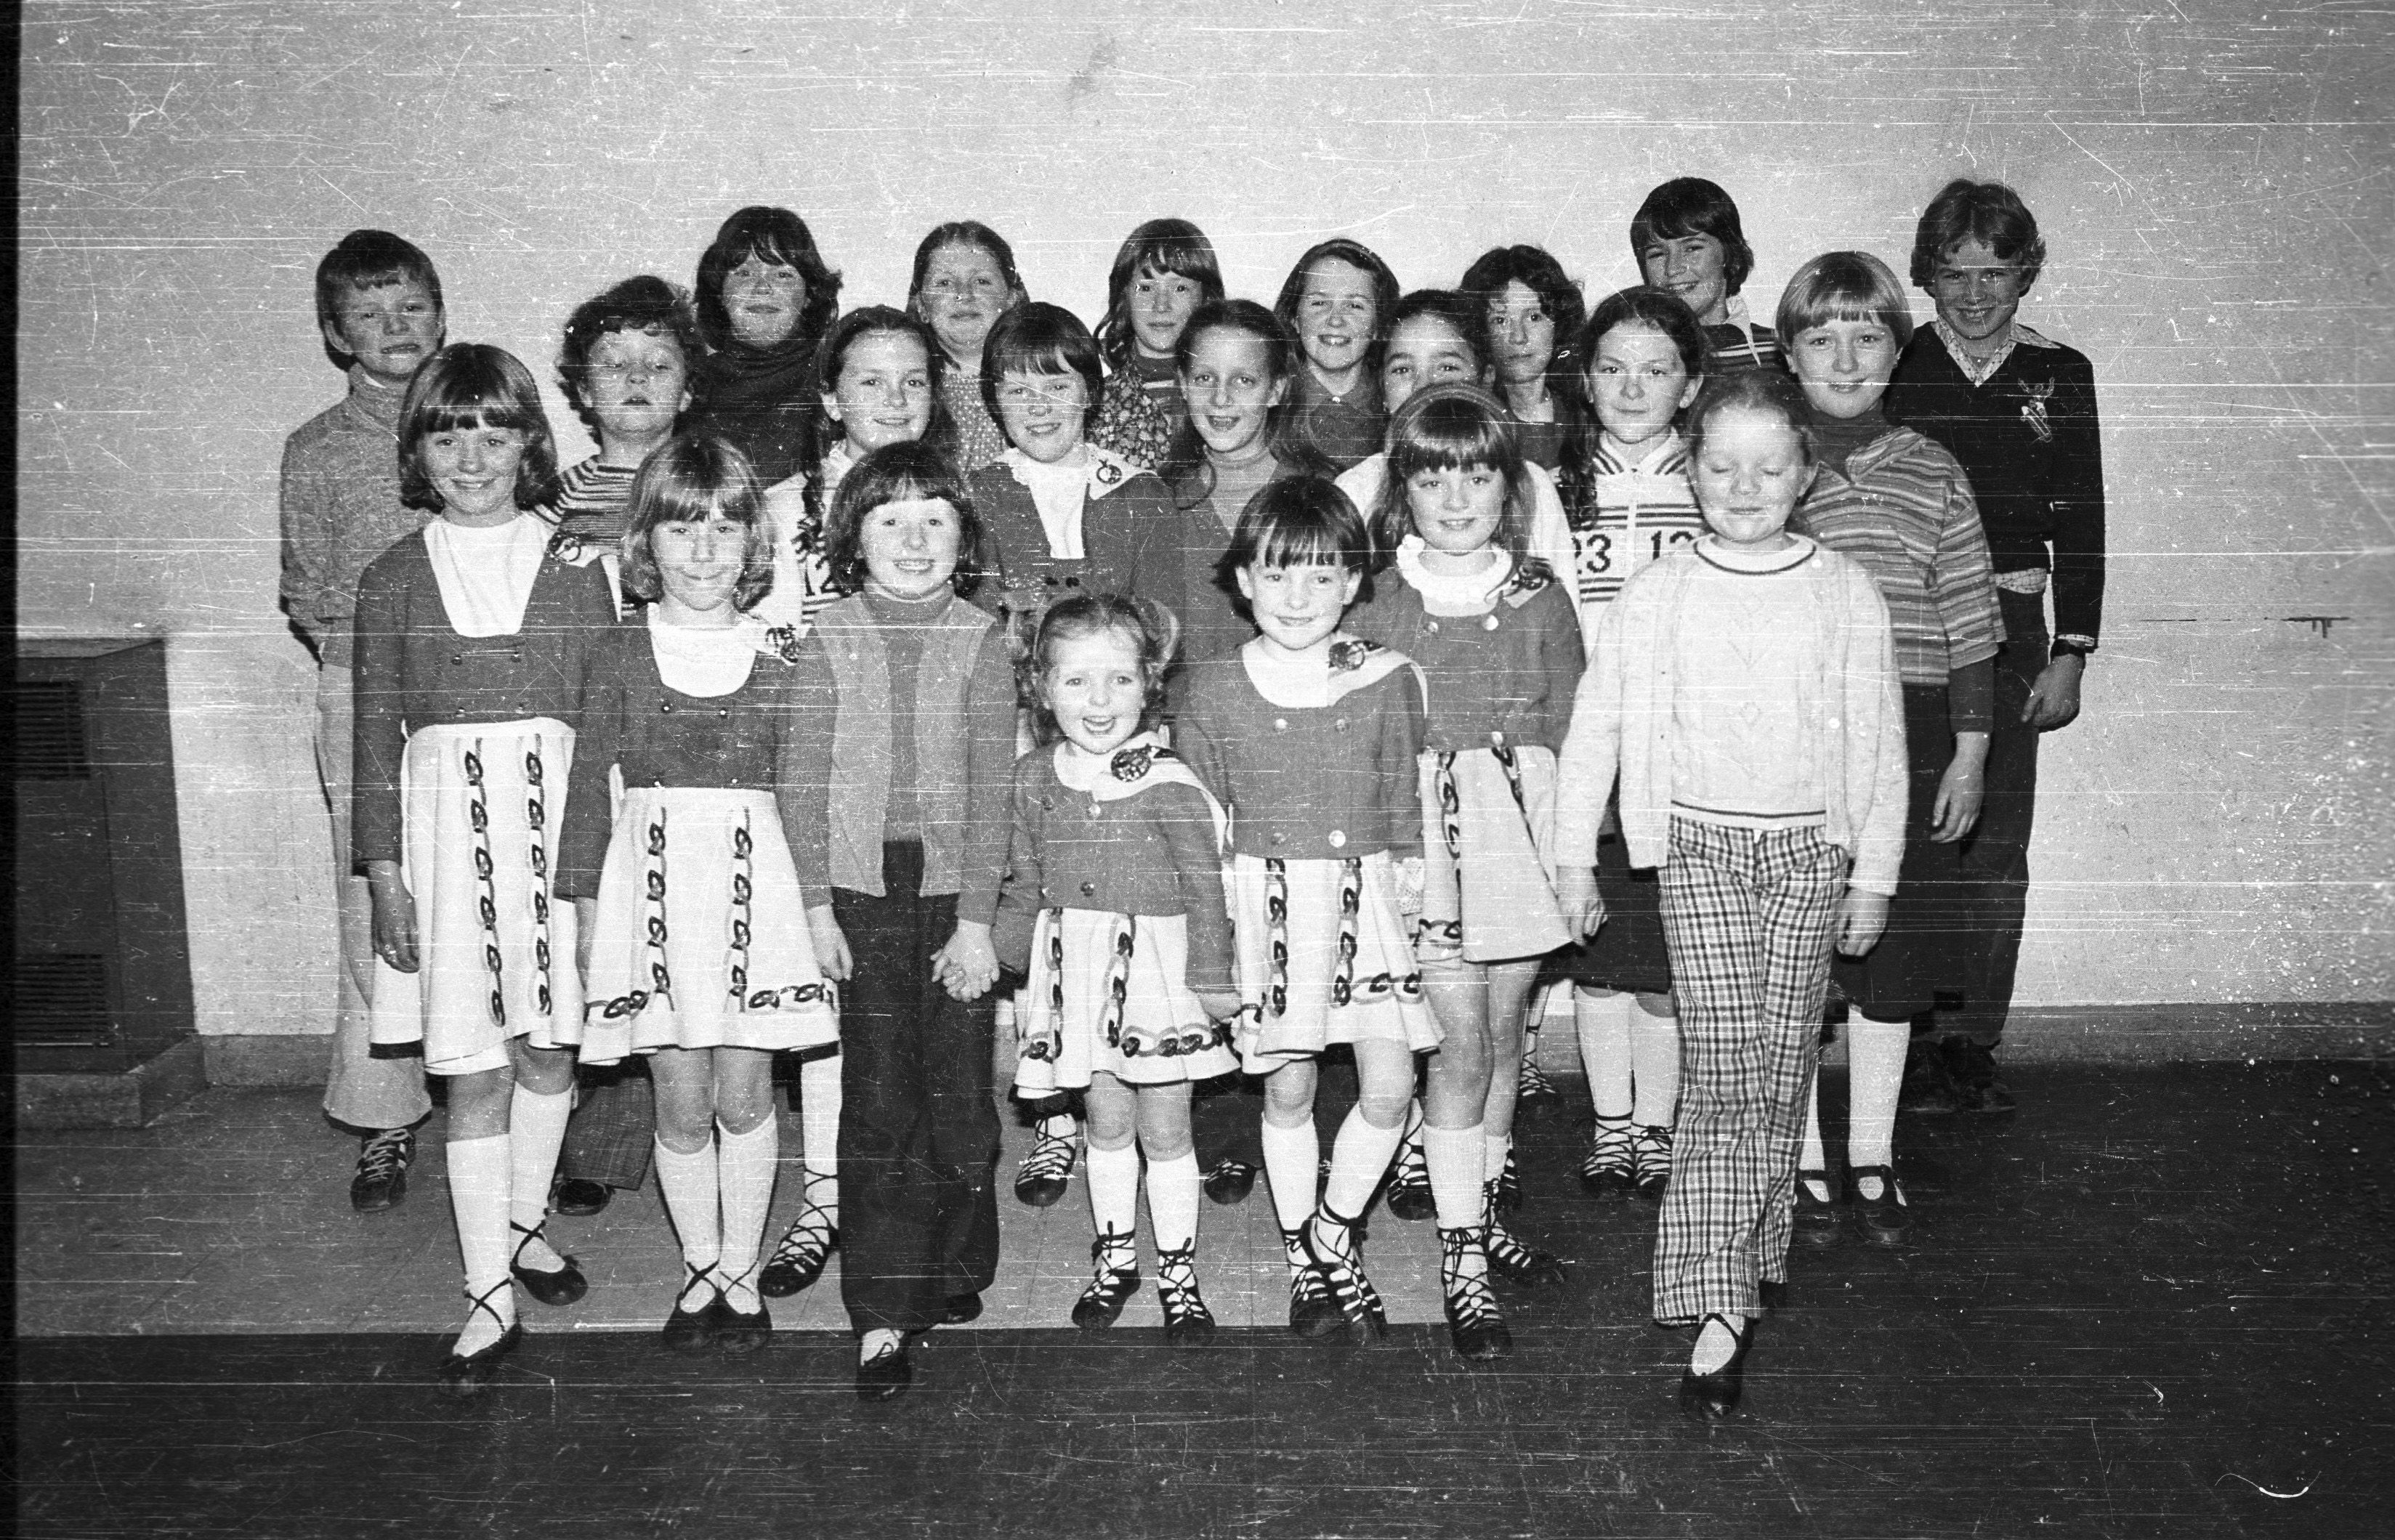 BEST FEET FORWARD: Members of Crean School of Dancing at St Michael\'s Youth Club after a club championship